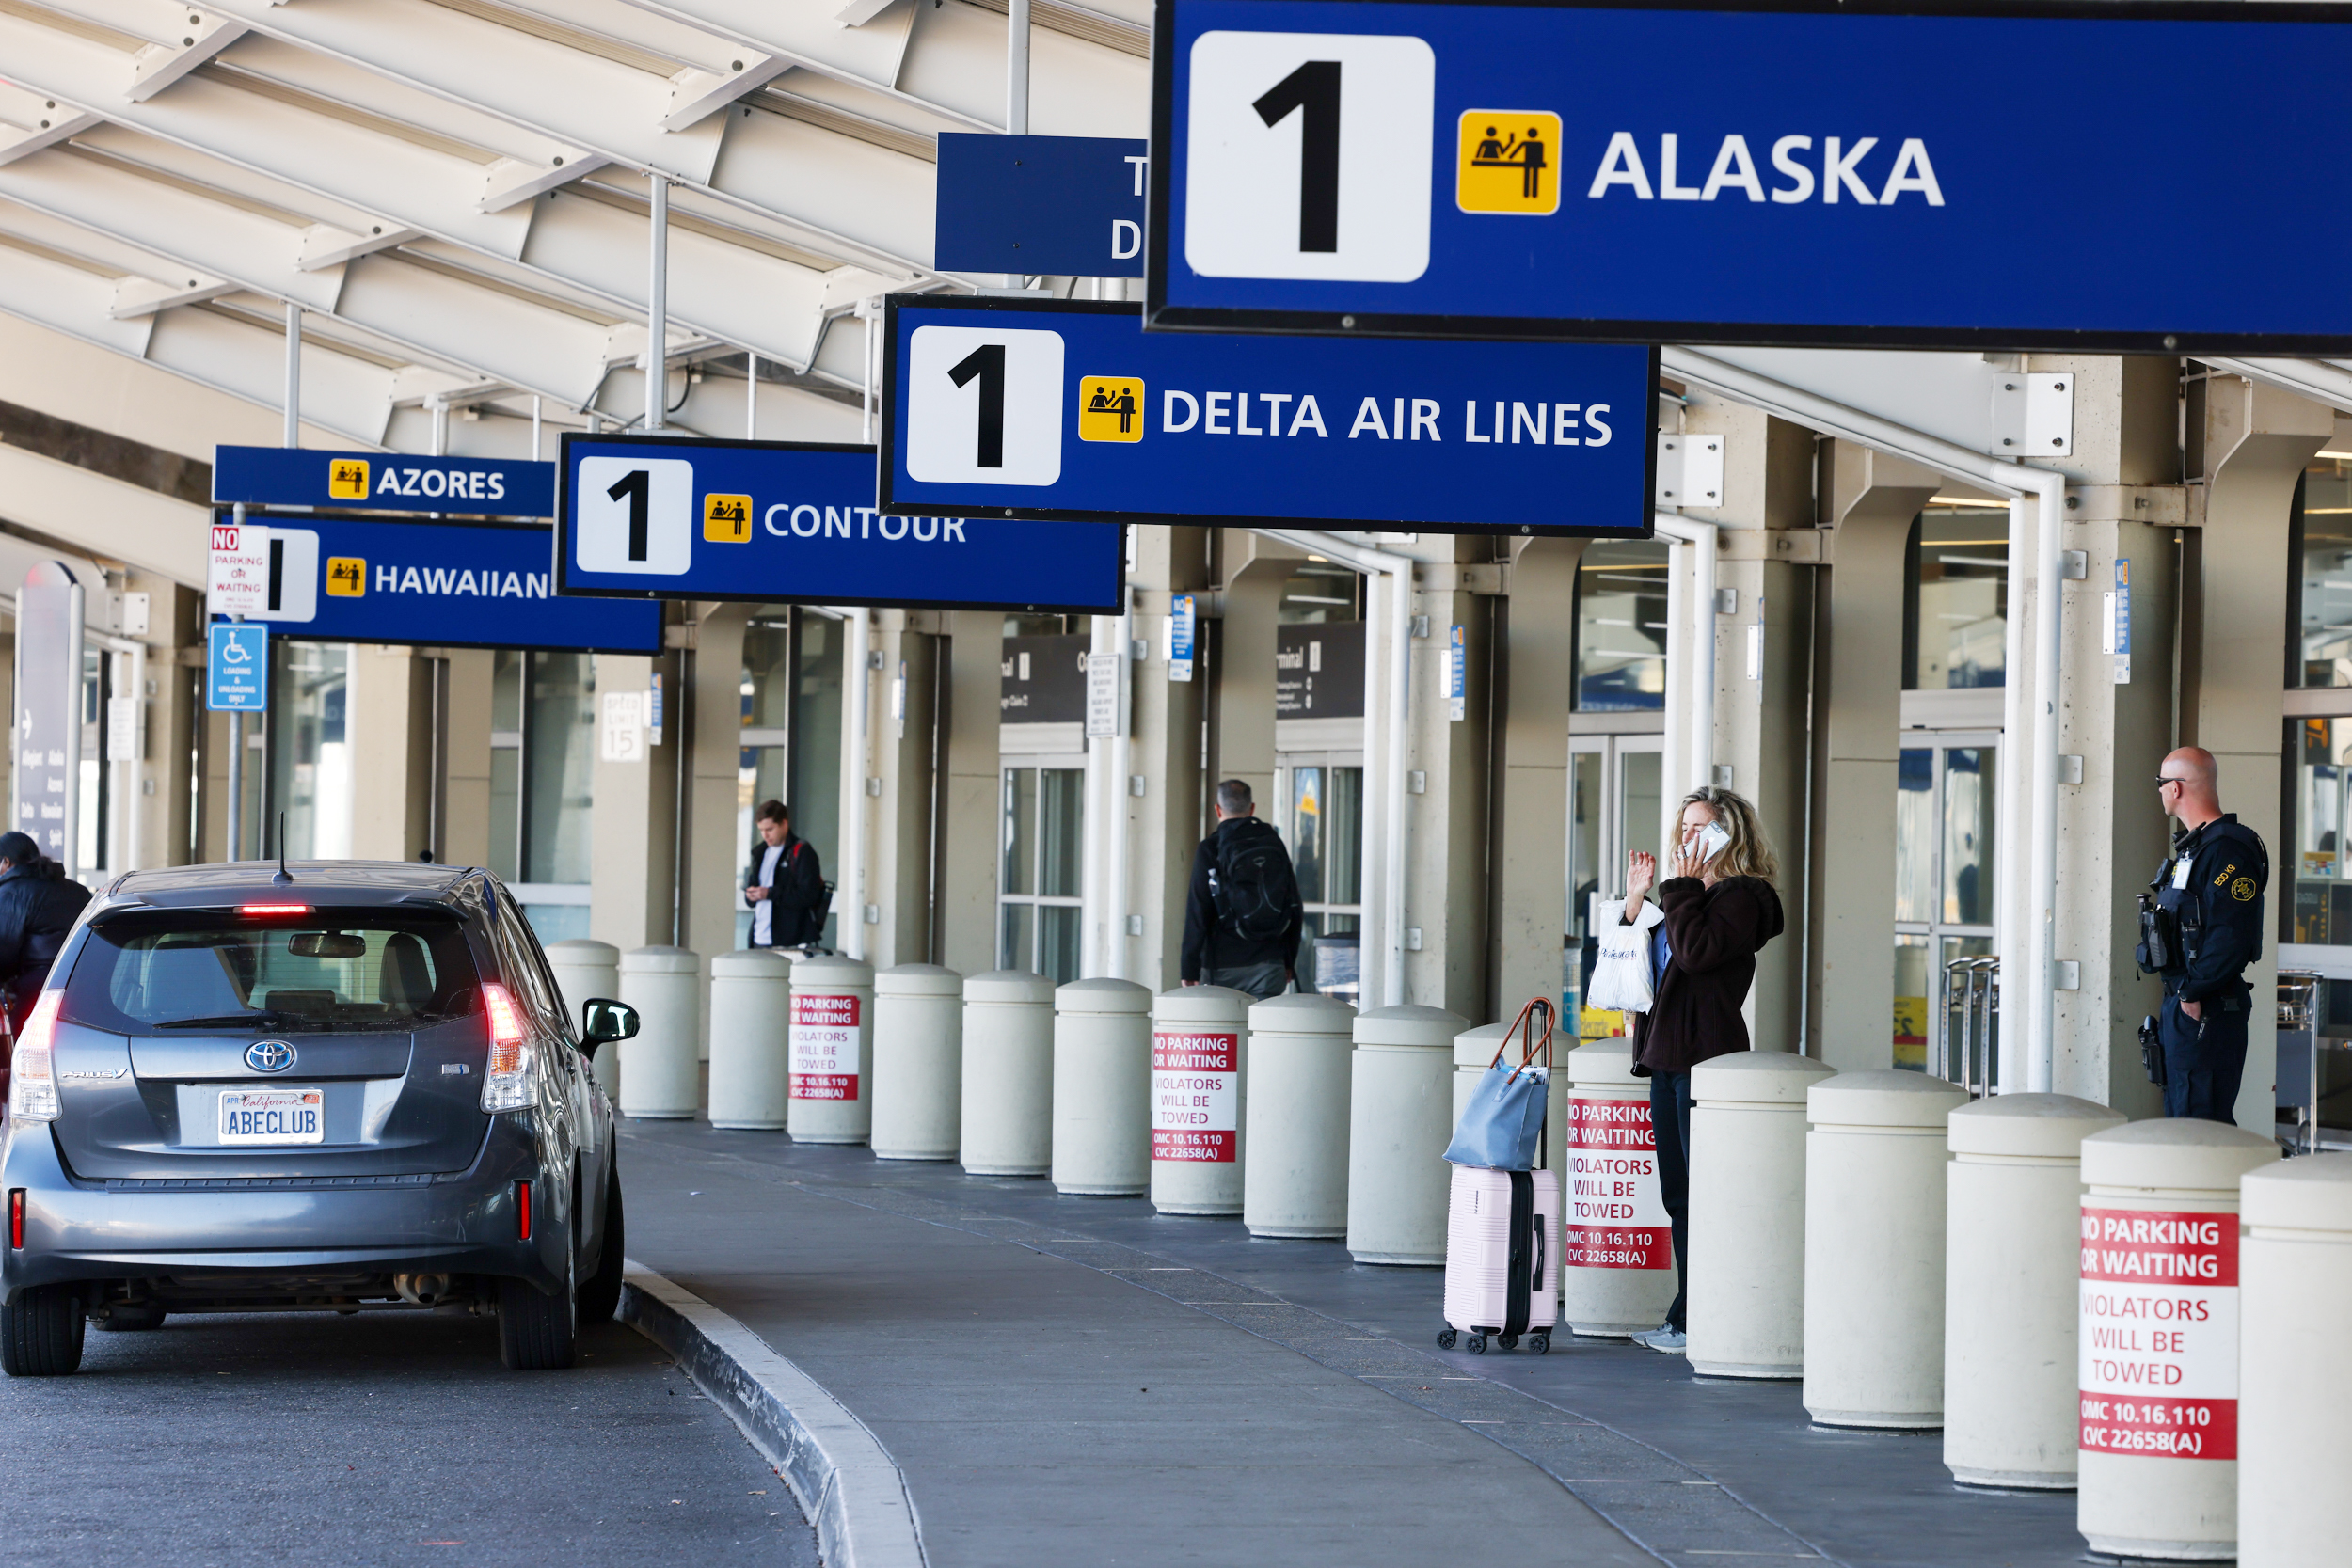 At an airport drop-off zone, people stand by signs for Alaska and Delta Air Lines; a car waits, and a security officer observes.